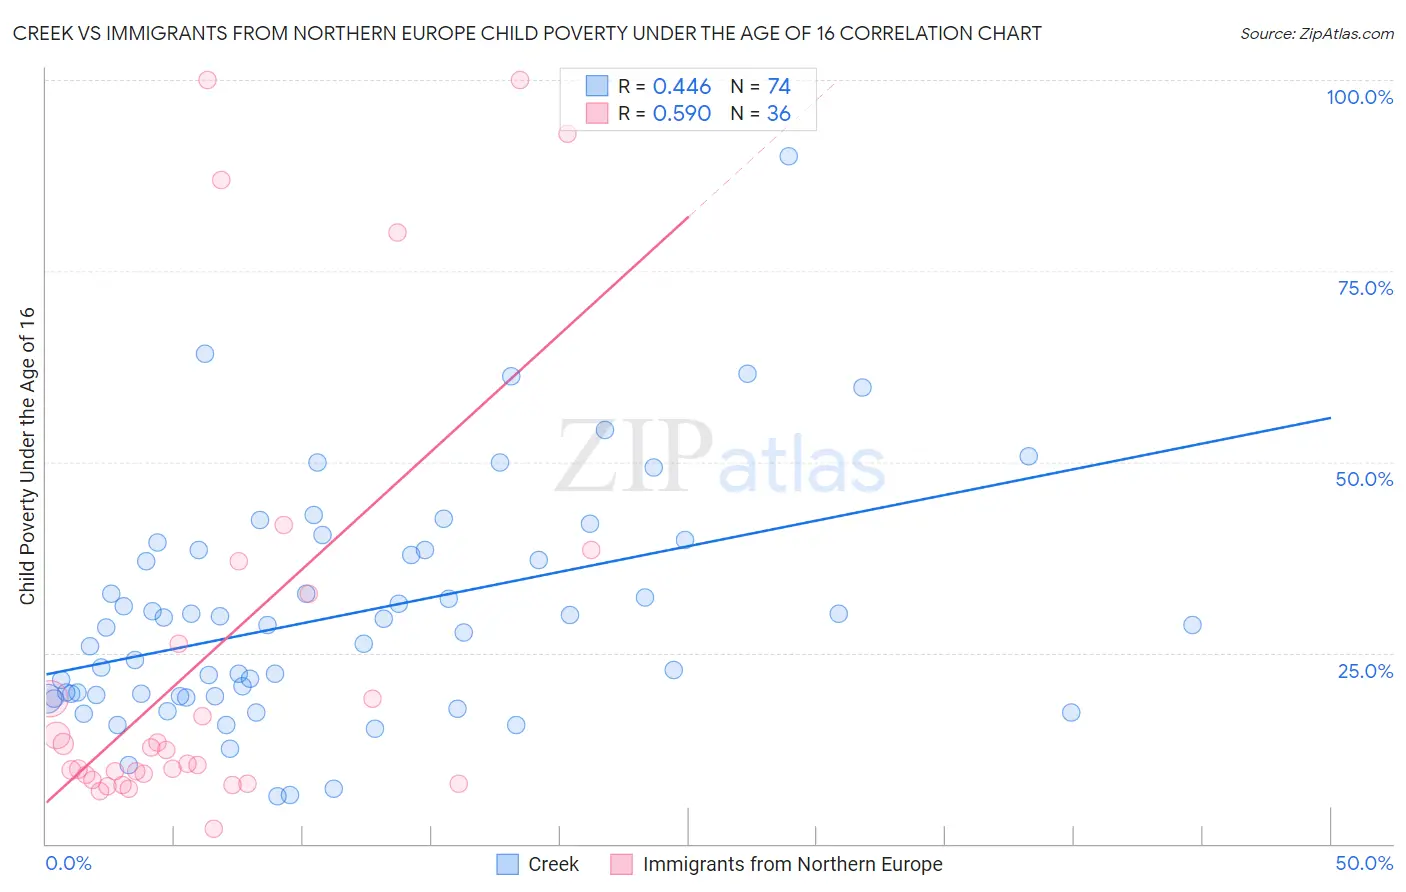 Creek vs Immigrants from Northern Europe Child Poverty Under the Age of 16